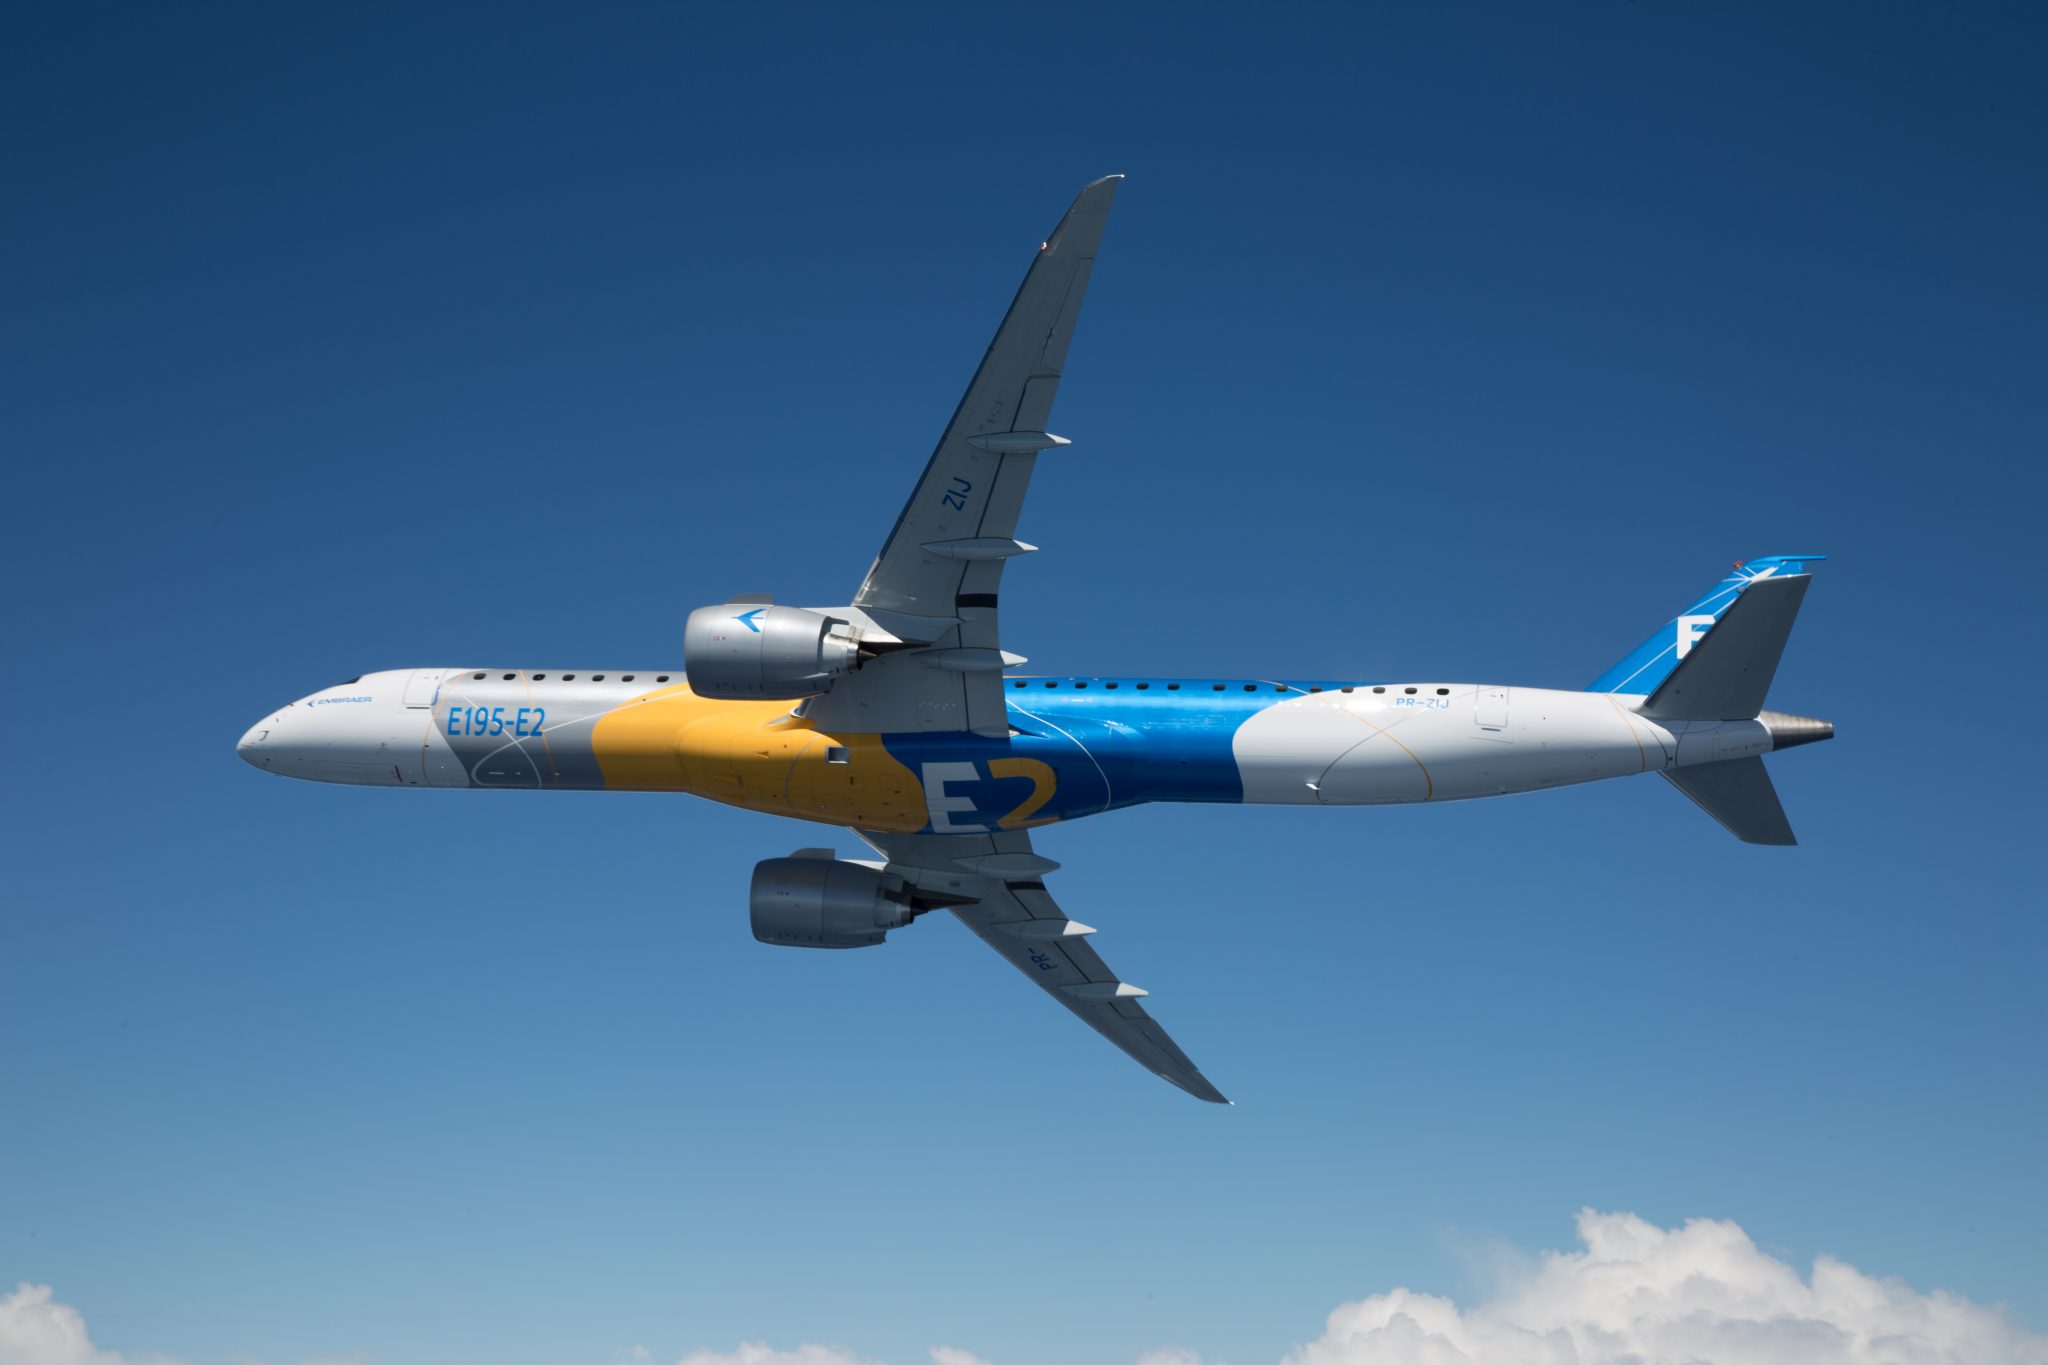 Saratov Airlines adds two Further E195 Aircraft and Extends Embraer Pool Program